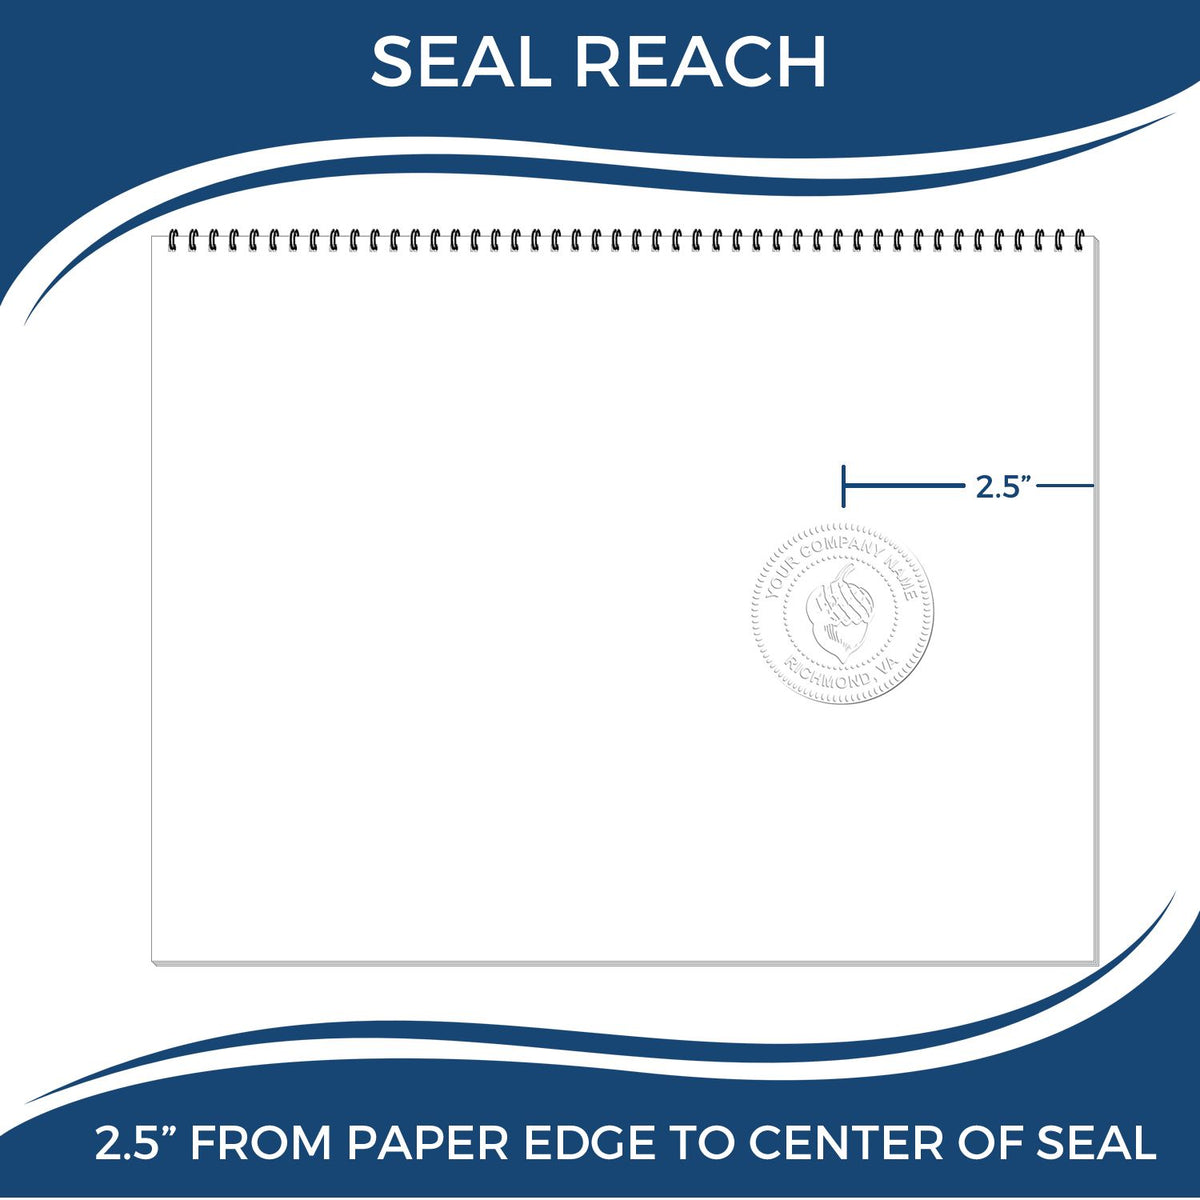 An infographic showing the seal reach which is represented by a ruler and a miniature seal image of the Long Reach Alabama Land Surveyor Seal